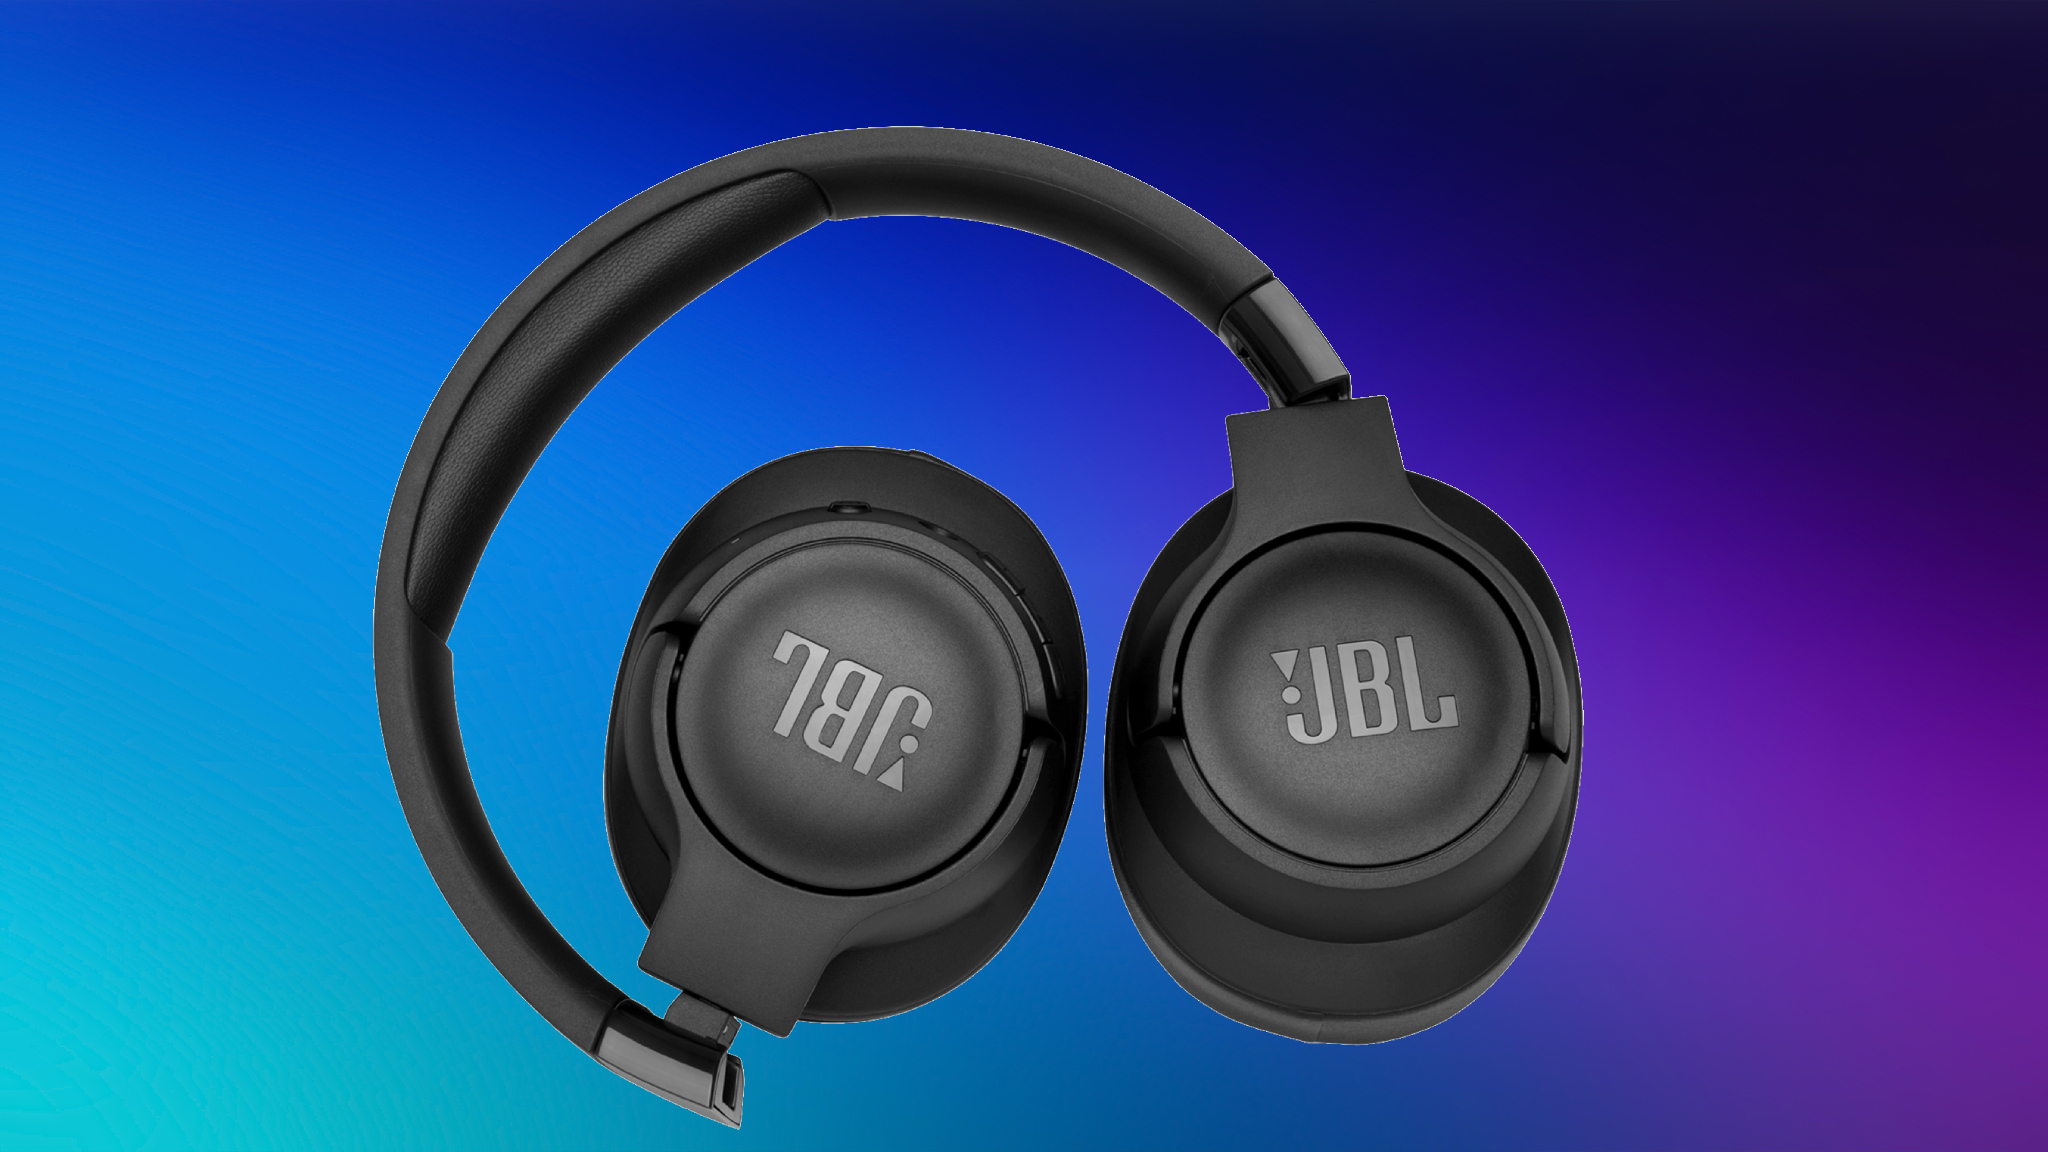 Review of #JBL Tune 710BT Wireless Over Ear Bluetooth Headphones